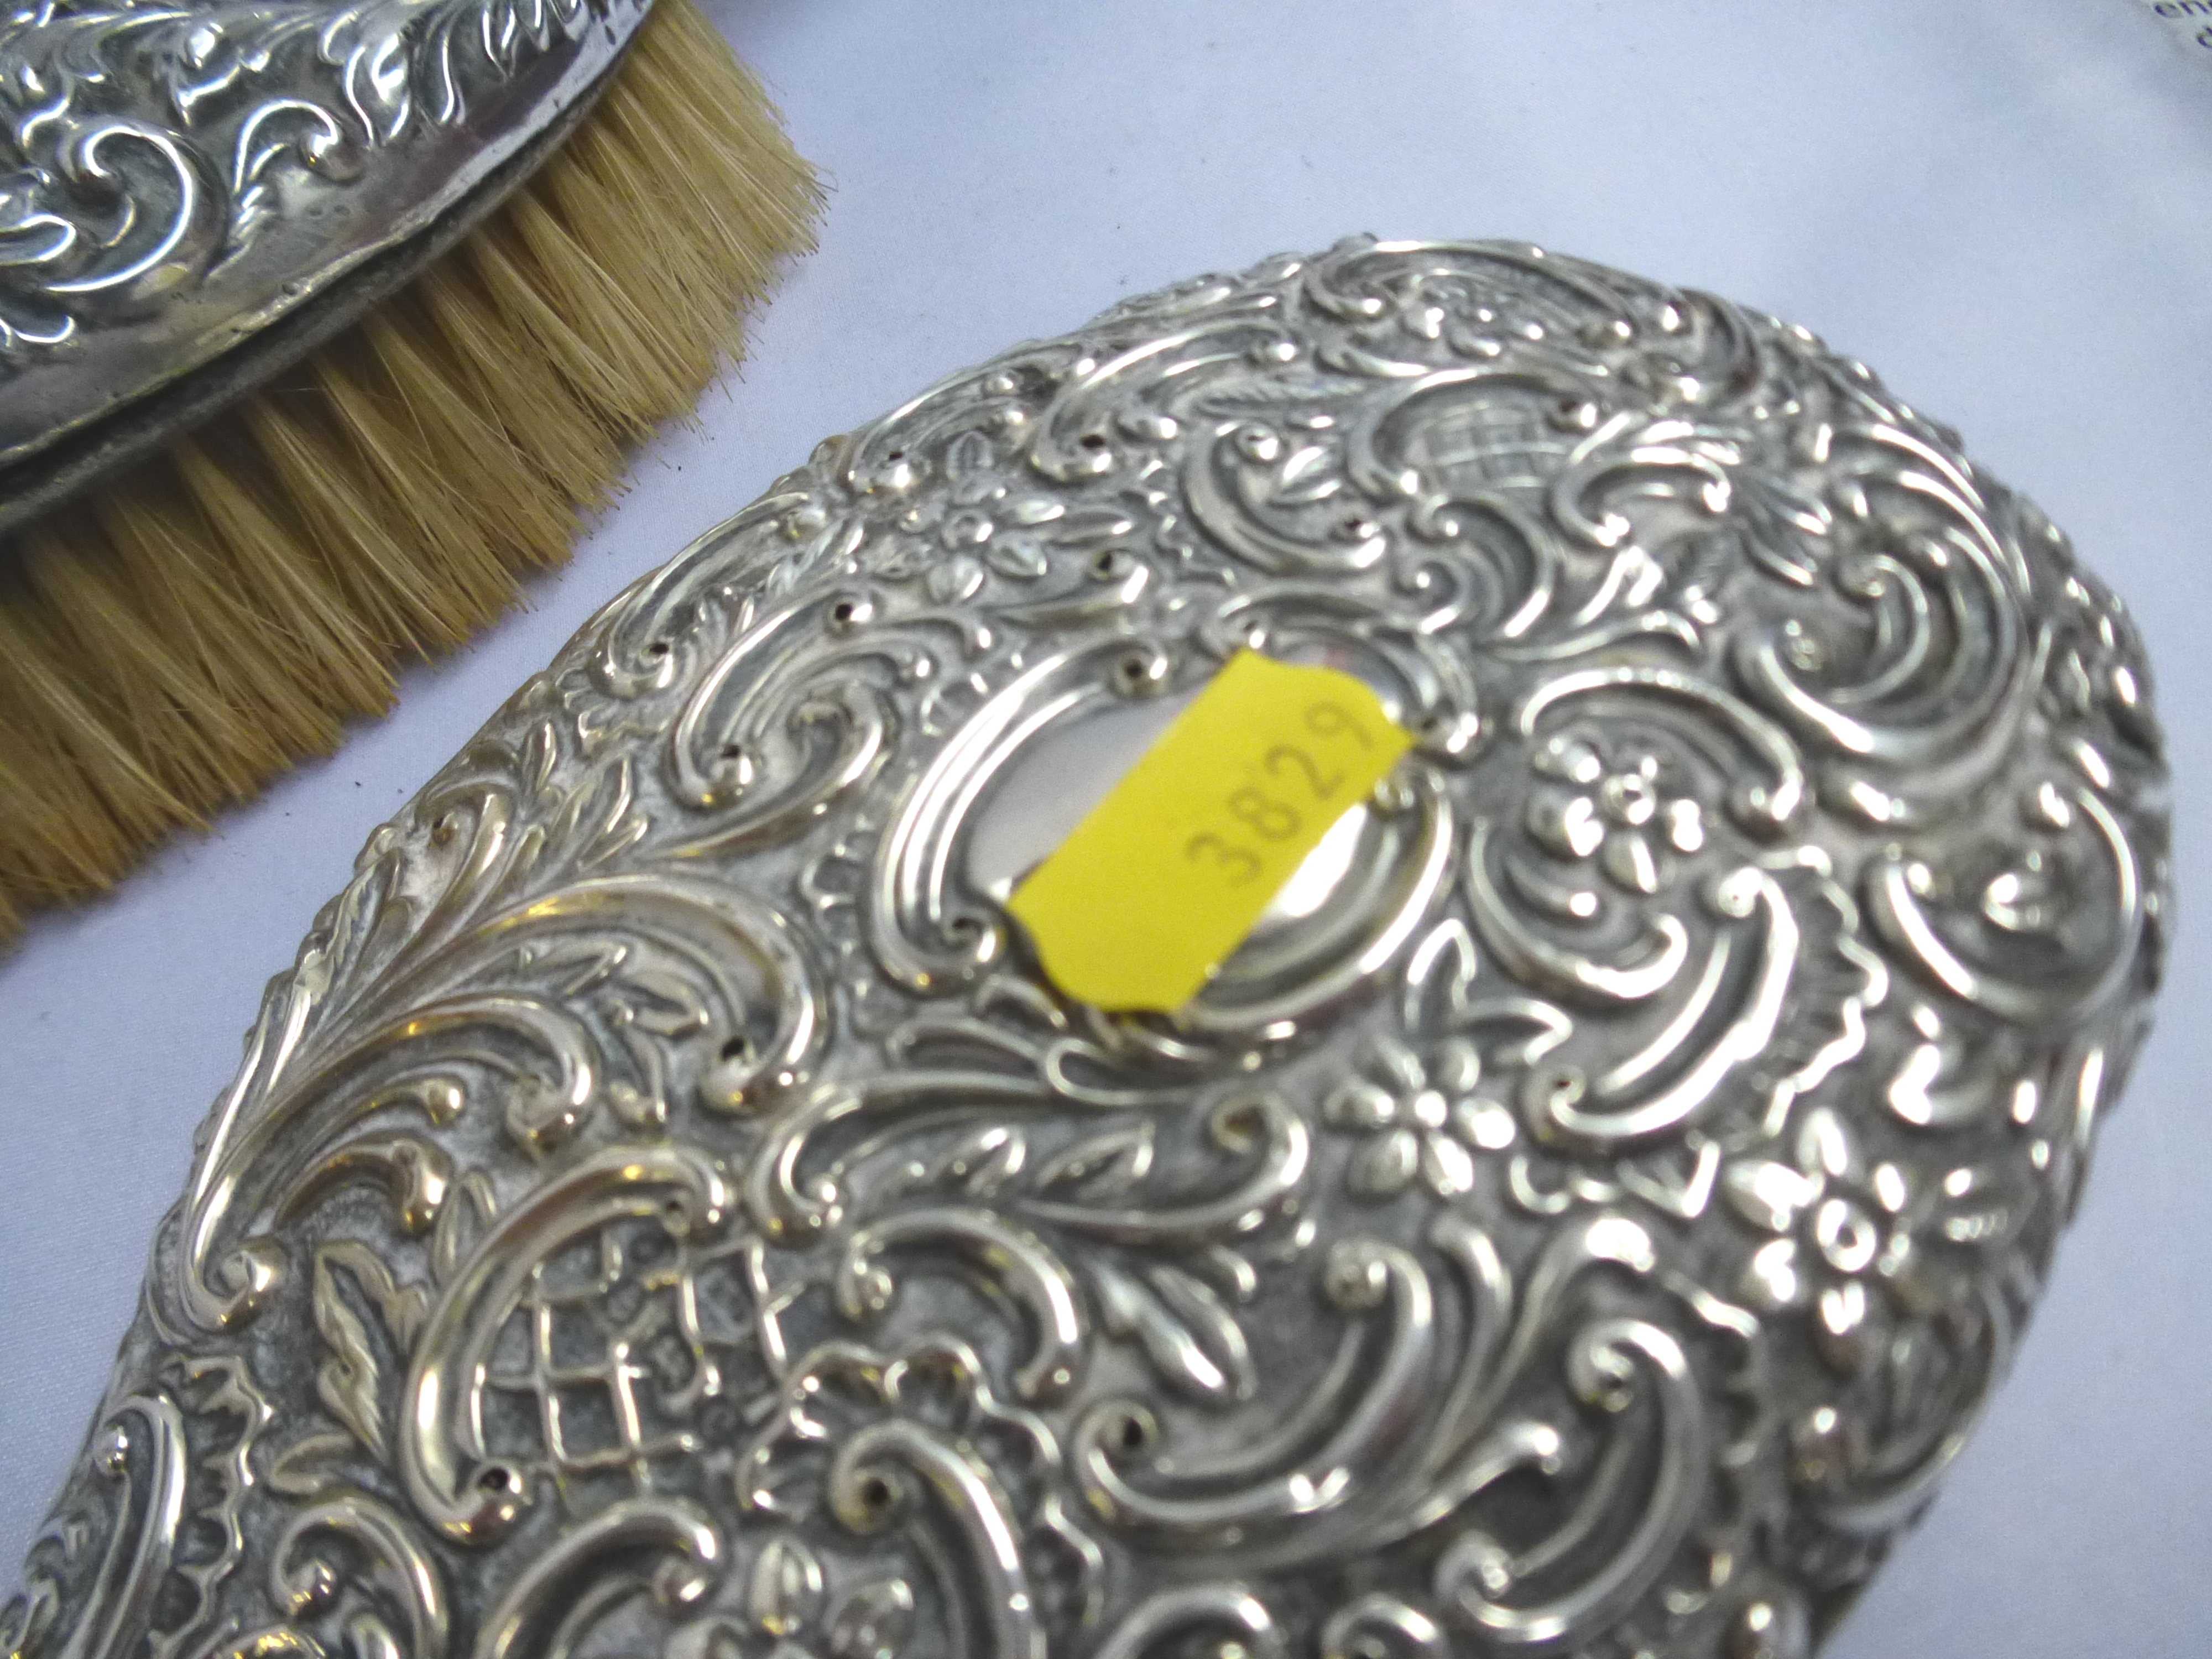 4 SILVER BACK BRUSHES AND A SILVER MIRROR - Image 8 of 14